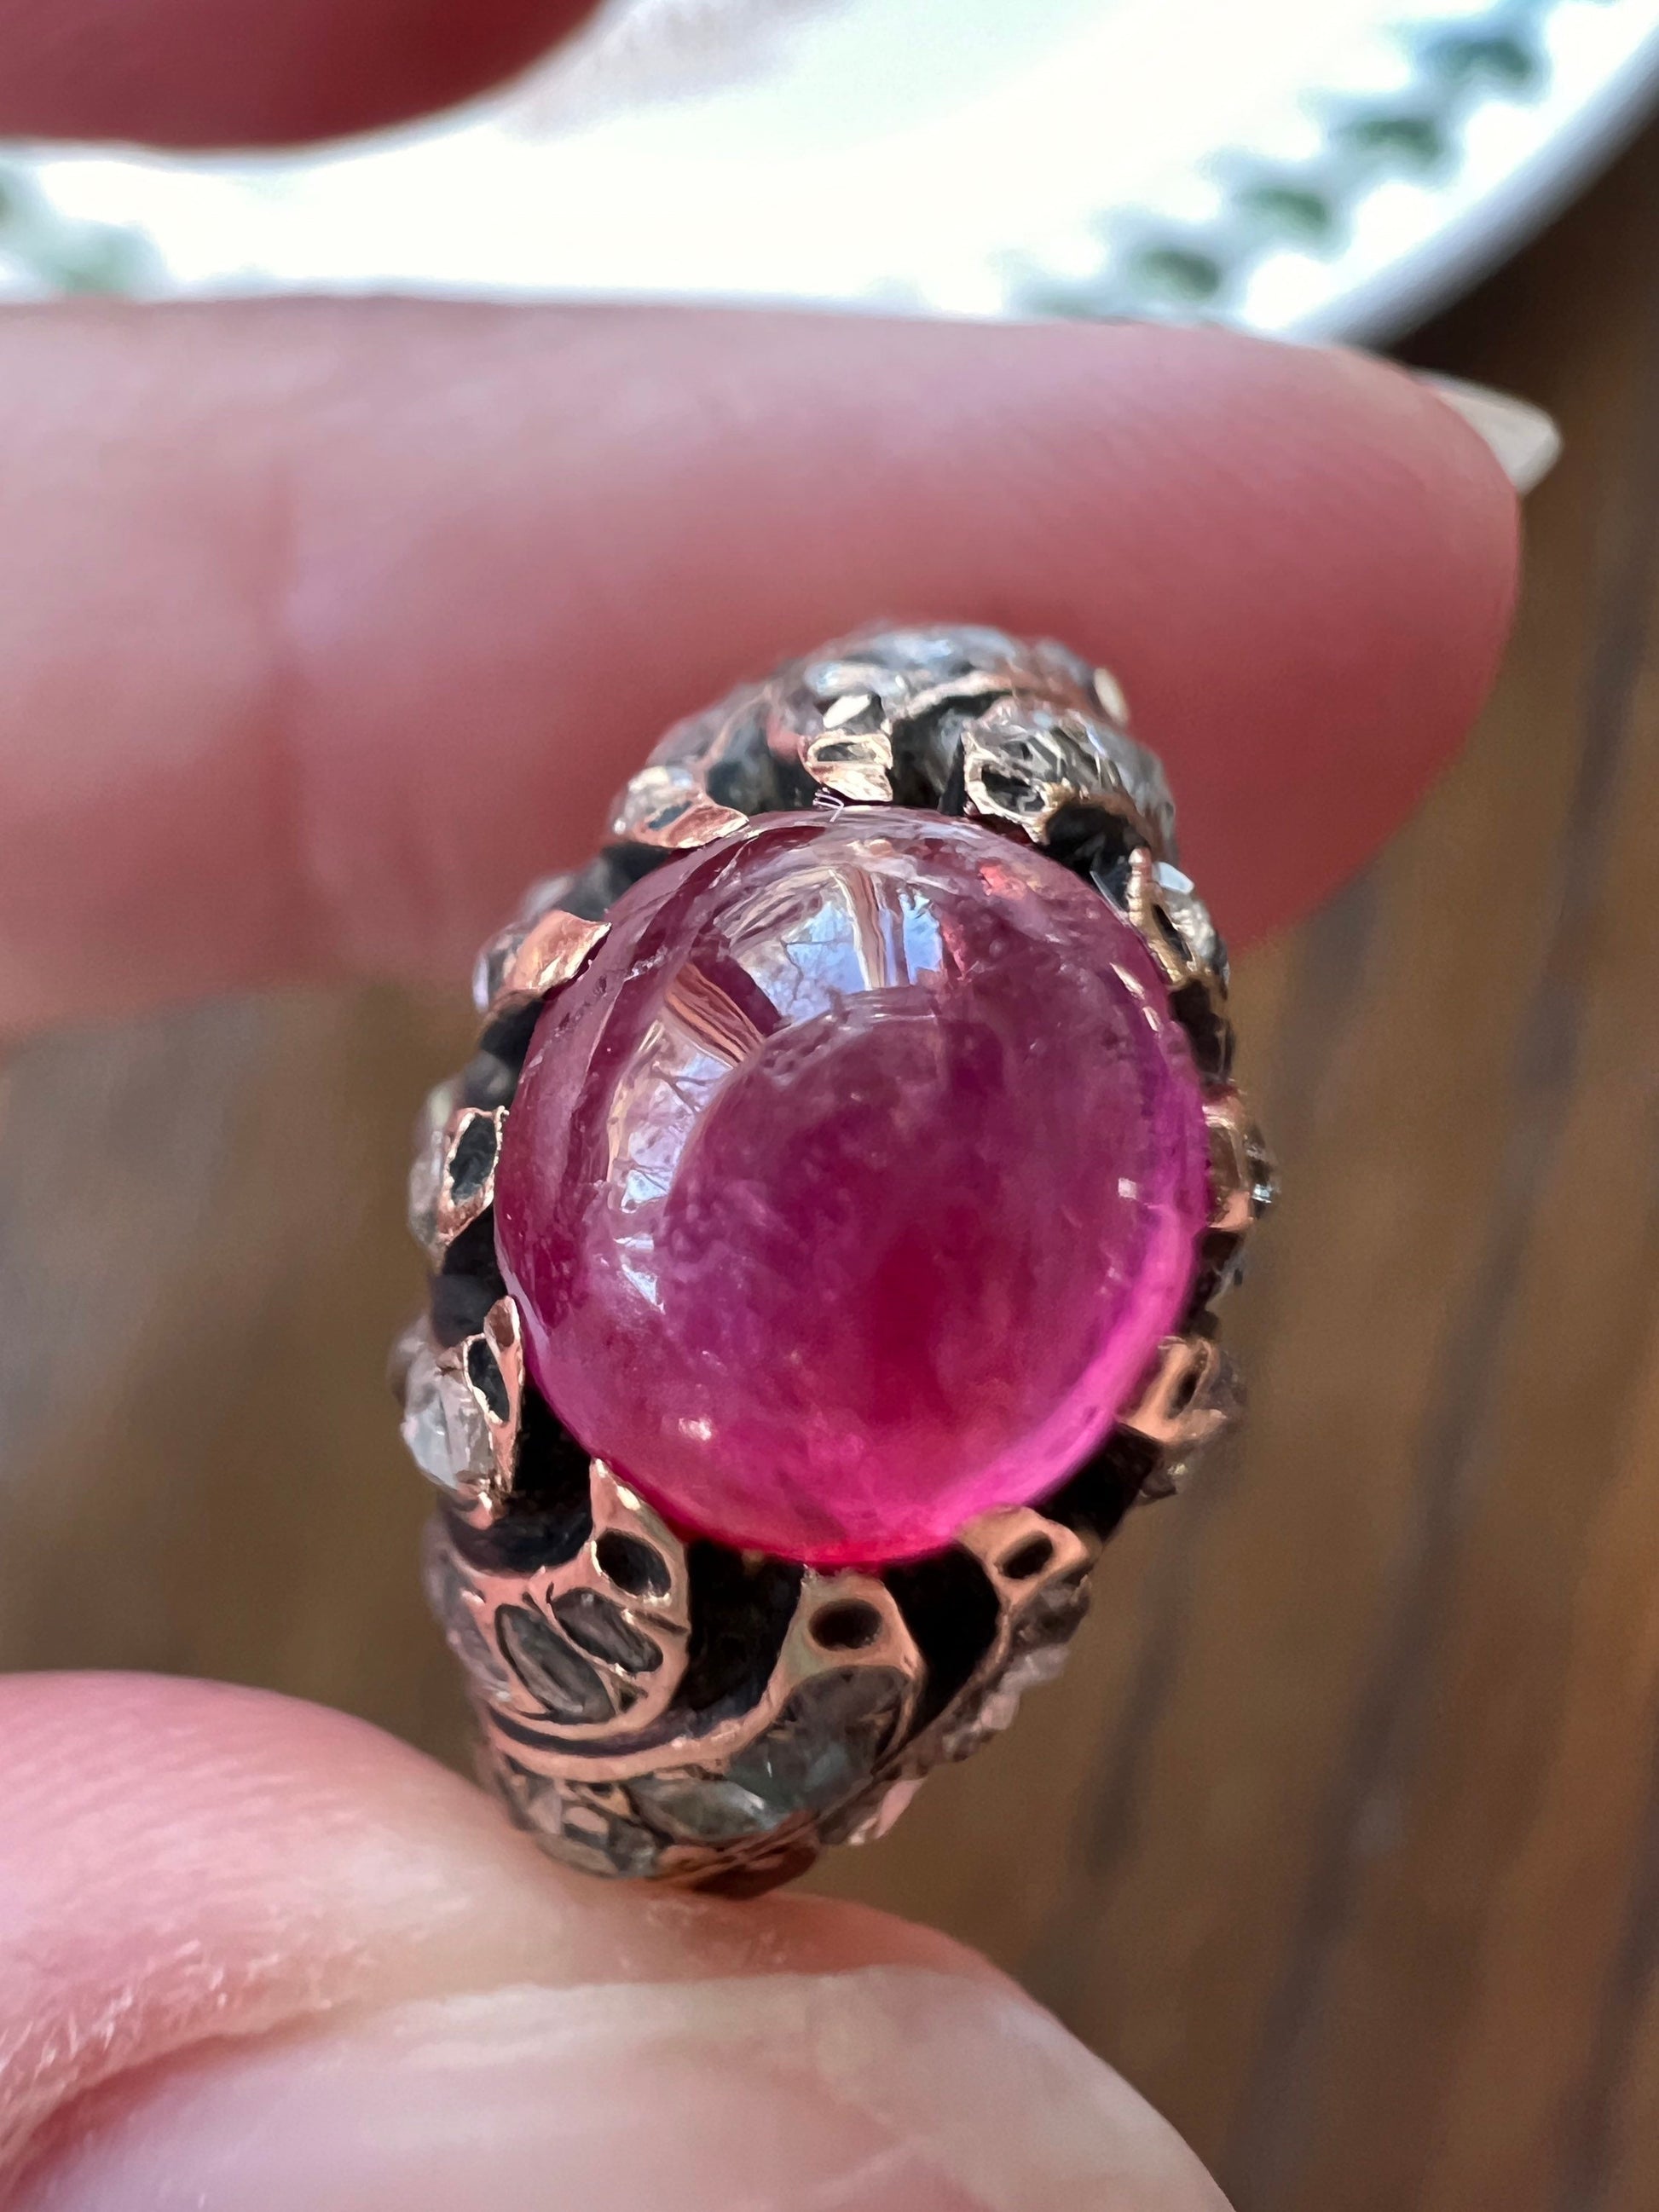 Victorian ANTIQUE Natural Pink RUBY 50 (!) Rose Cut DIAMOND 1 Carat Swirl Antique Ring 14k Rosy Gold Stacker Romantic Gift Belle Epoque Tall